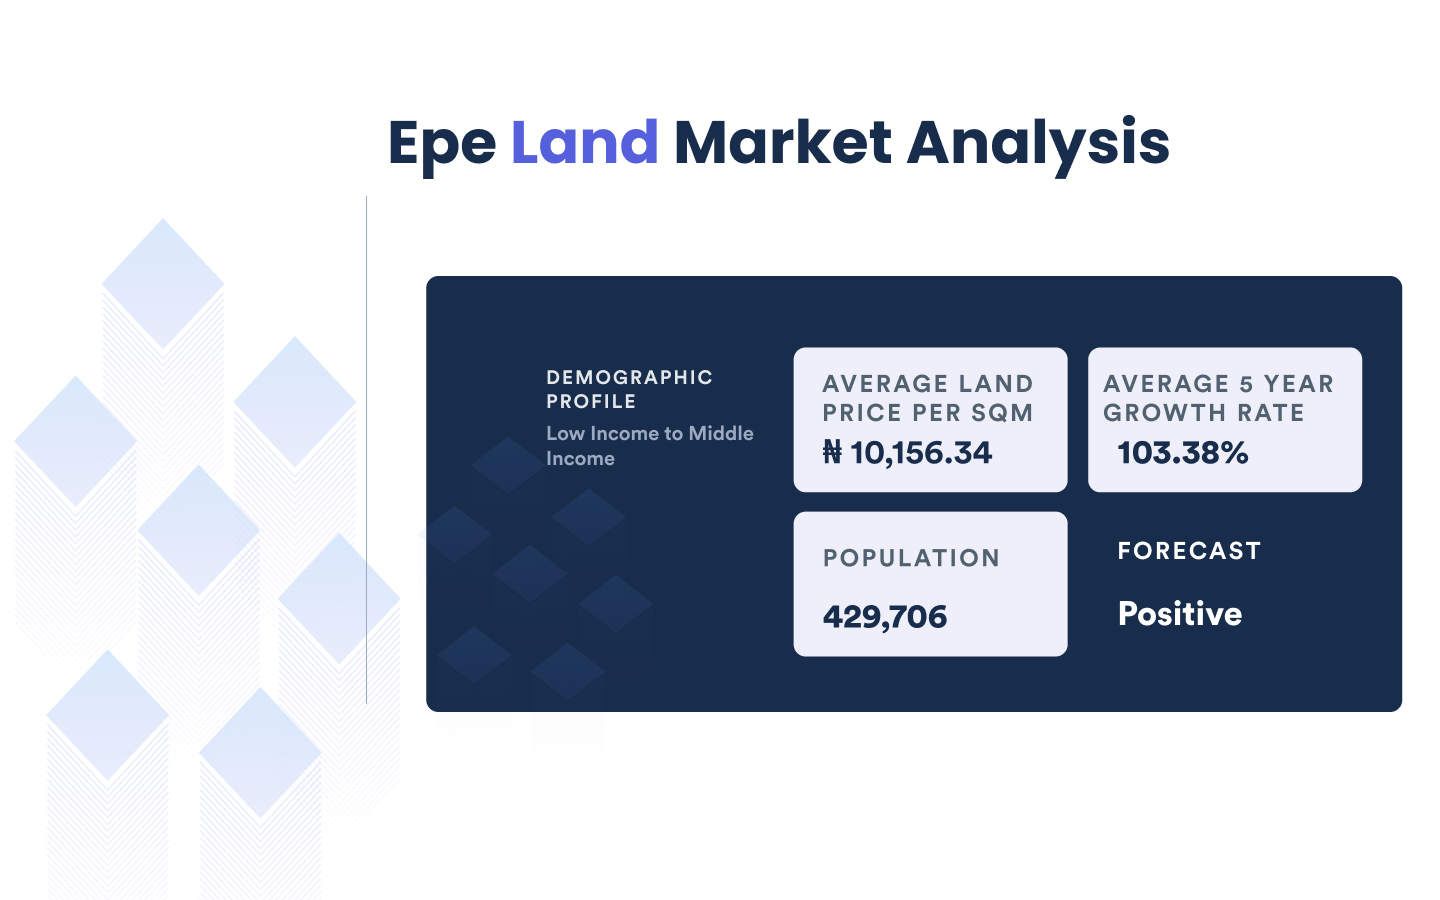 Epe Land Prices have jumped by over 100% in the past 5 years